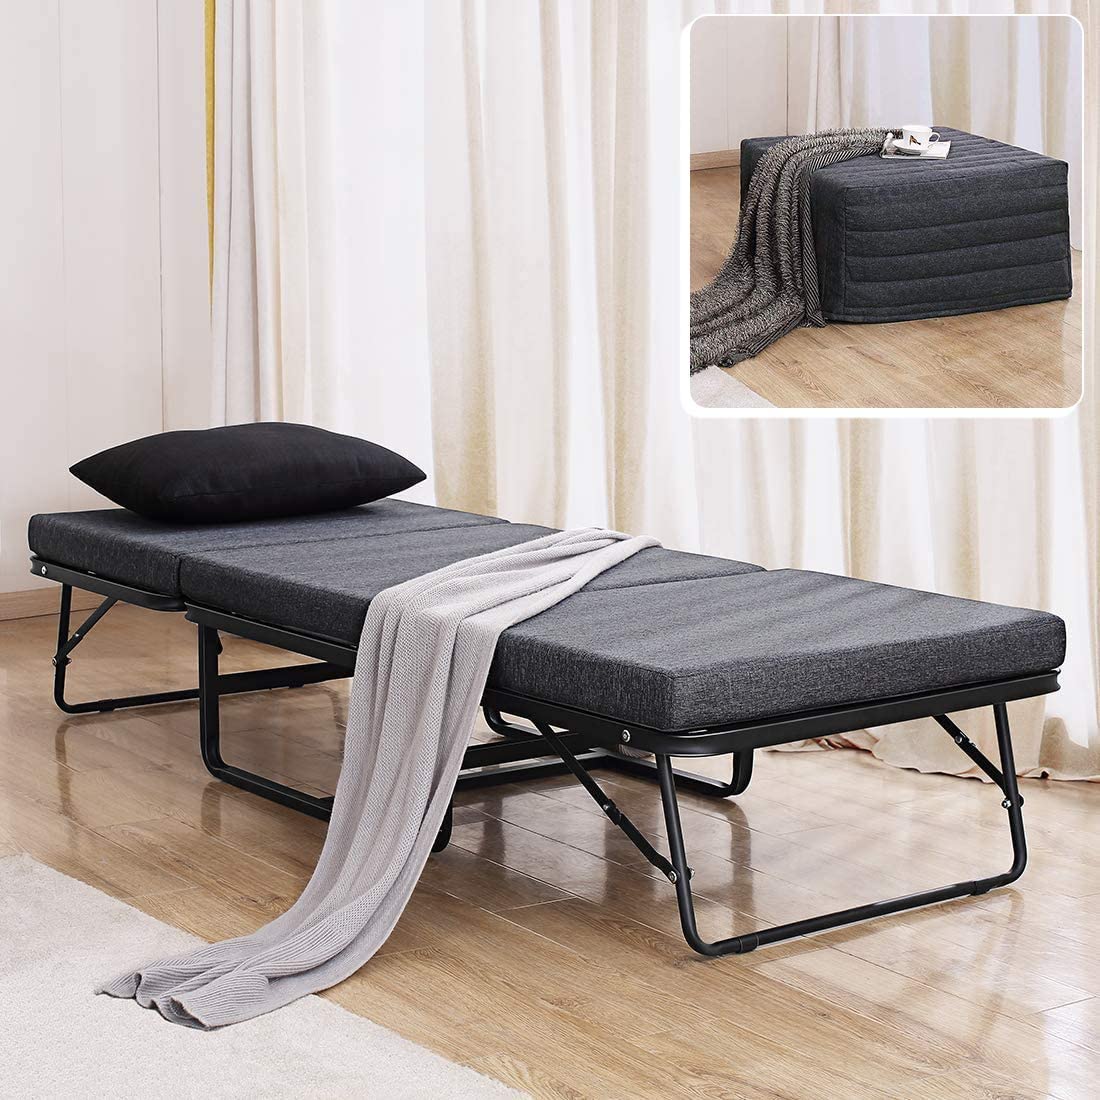 Tatago Ottoman Folding Bed with Steel Mesh Wire Lattice Base, 78" x 30" - image 1 of 7